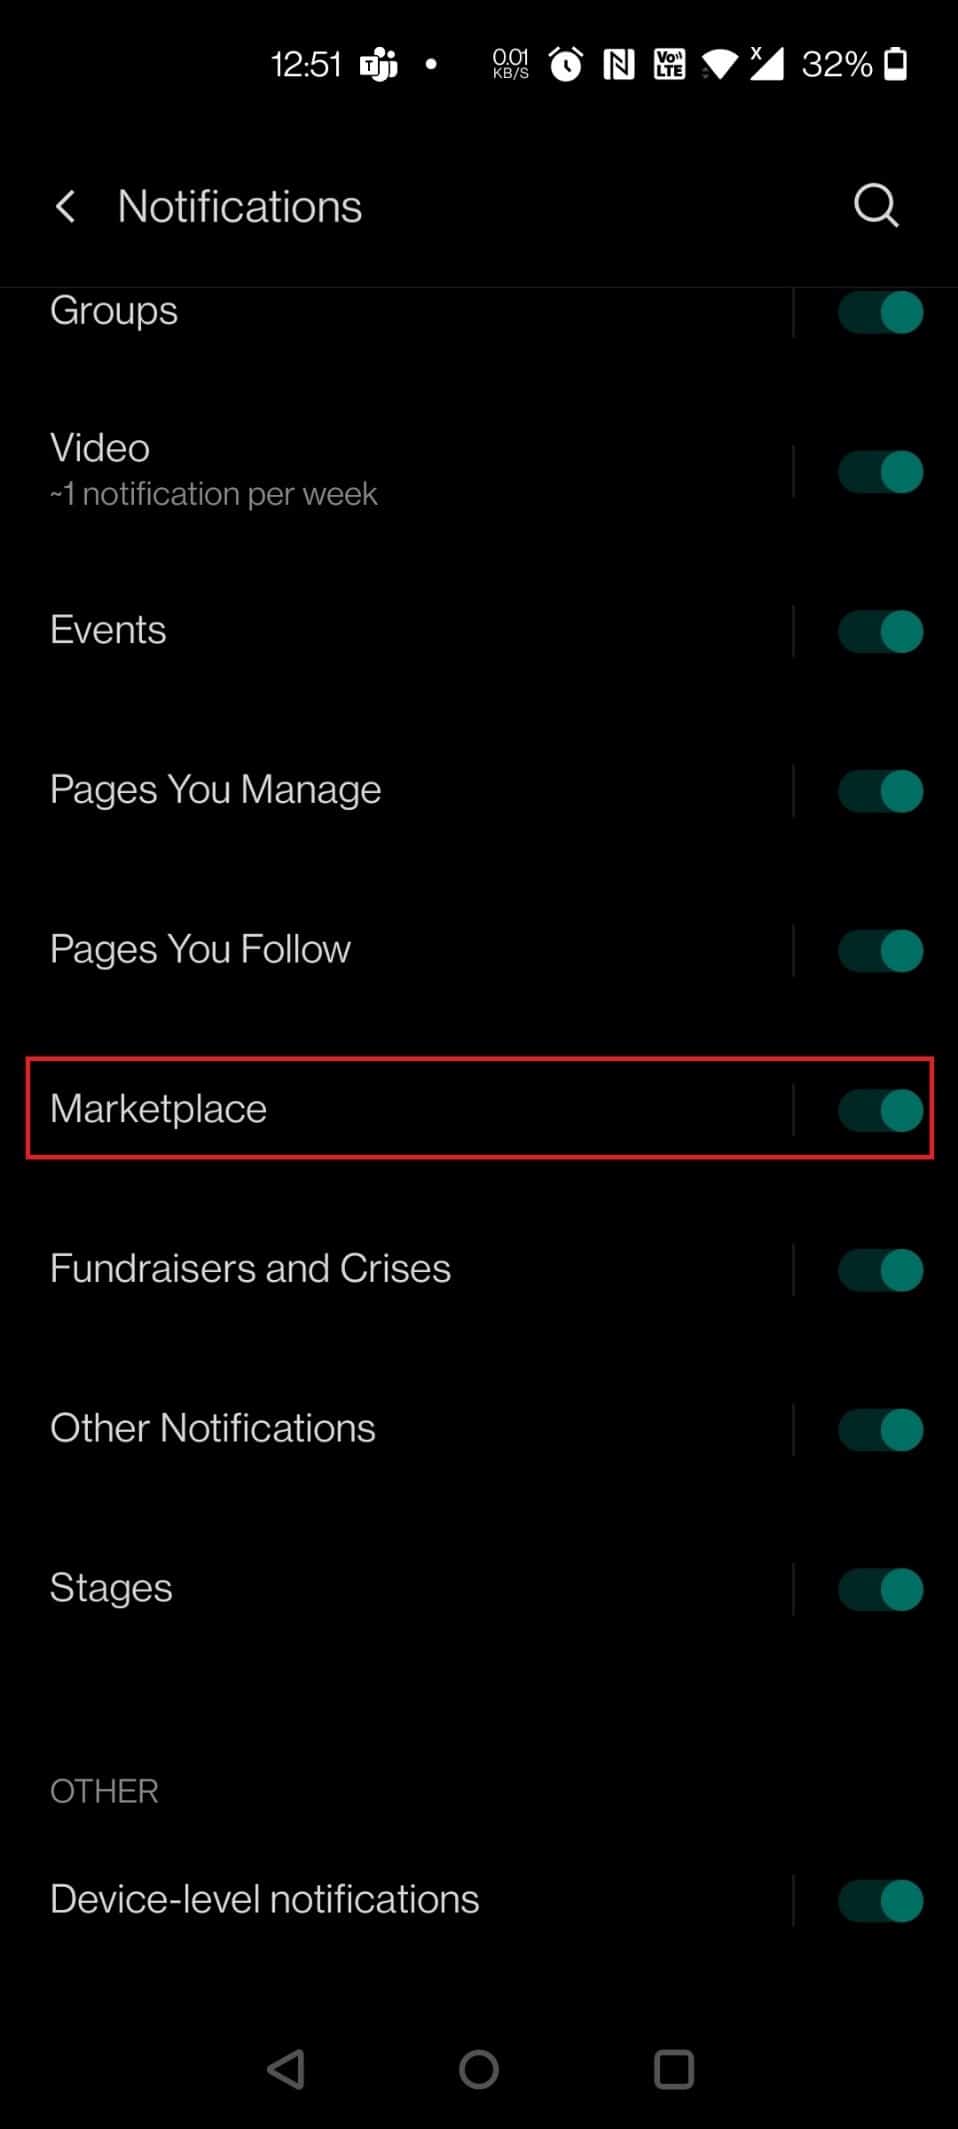 Swipe down and turn off the toggle against the option Marketplace. How to Turn Off Facebook Marketplace Notifications